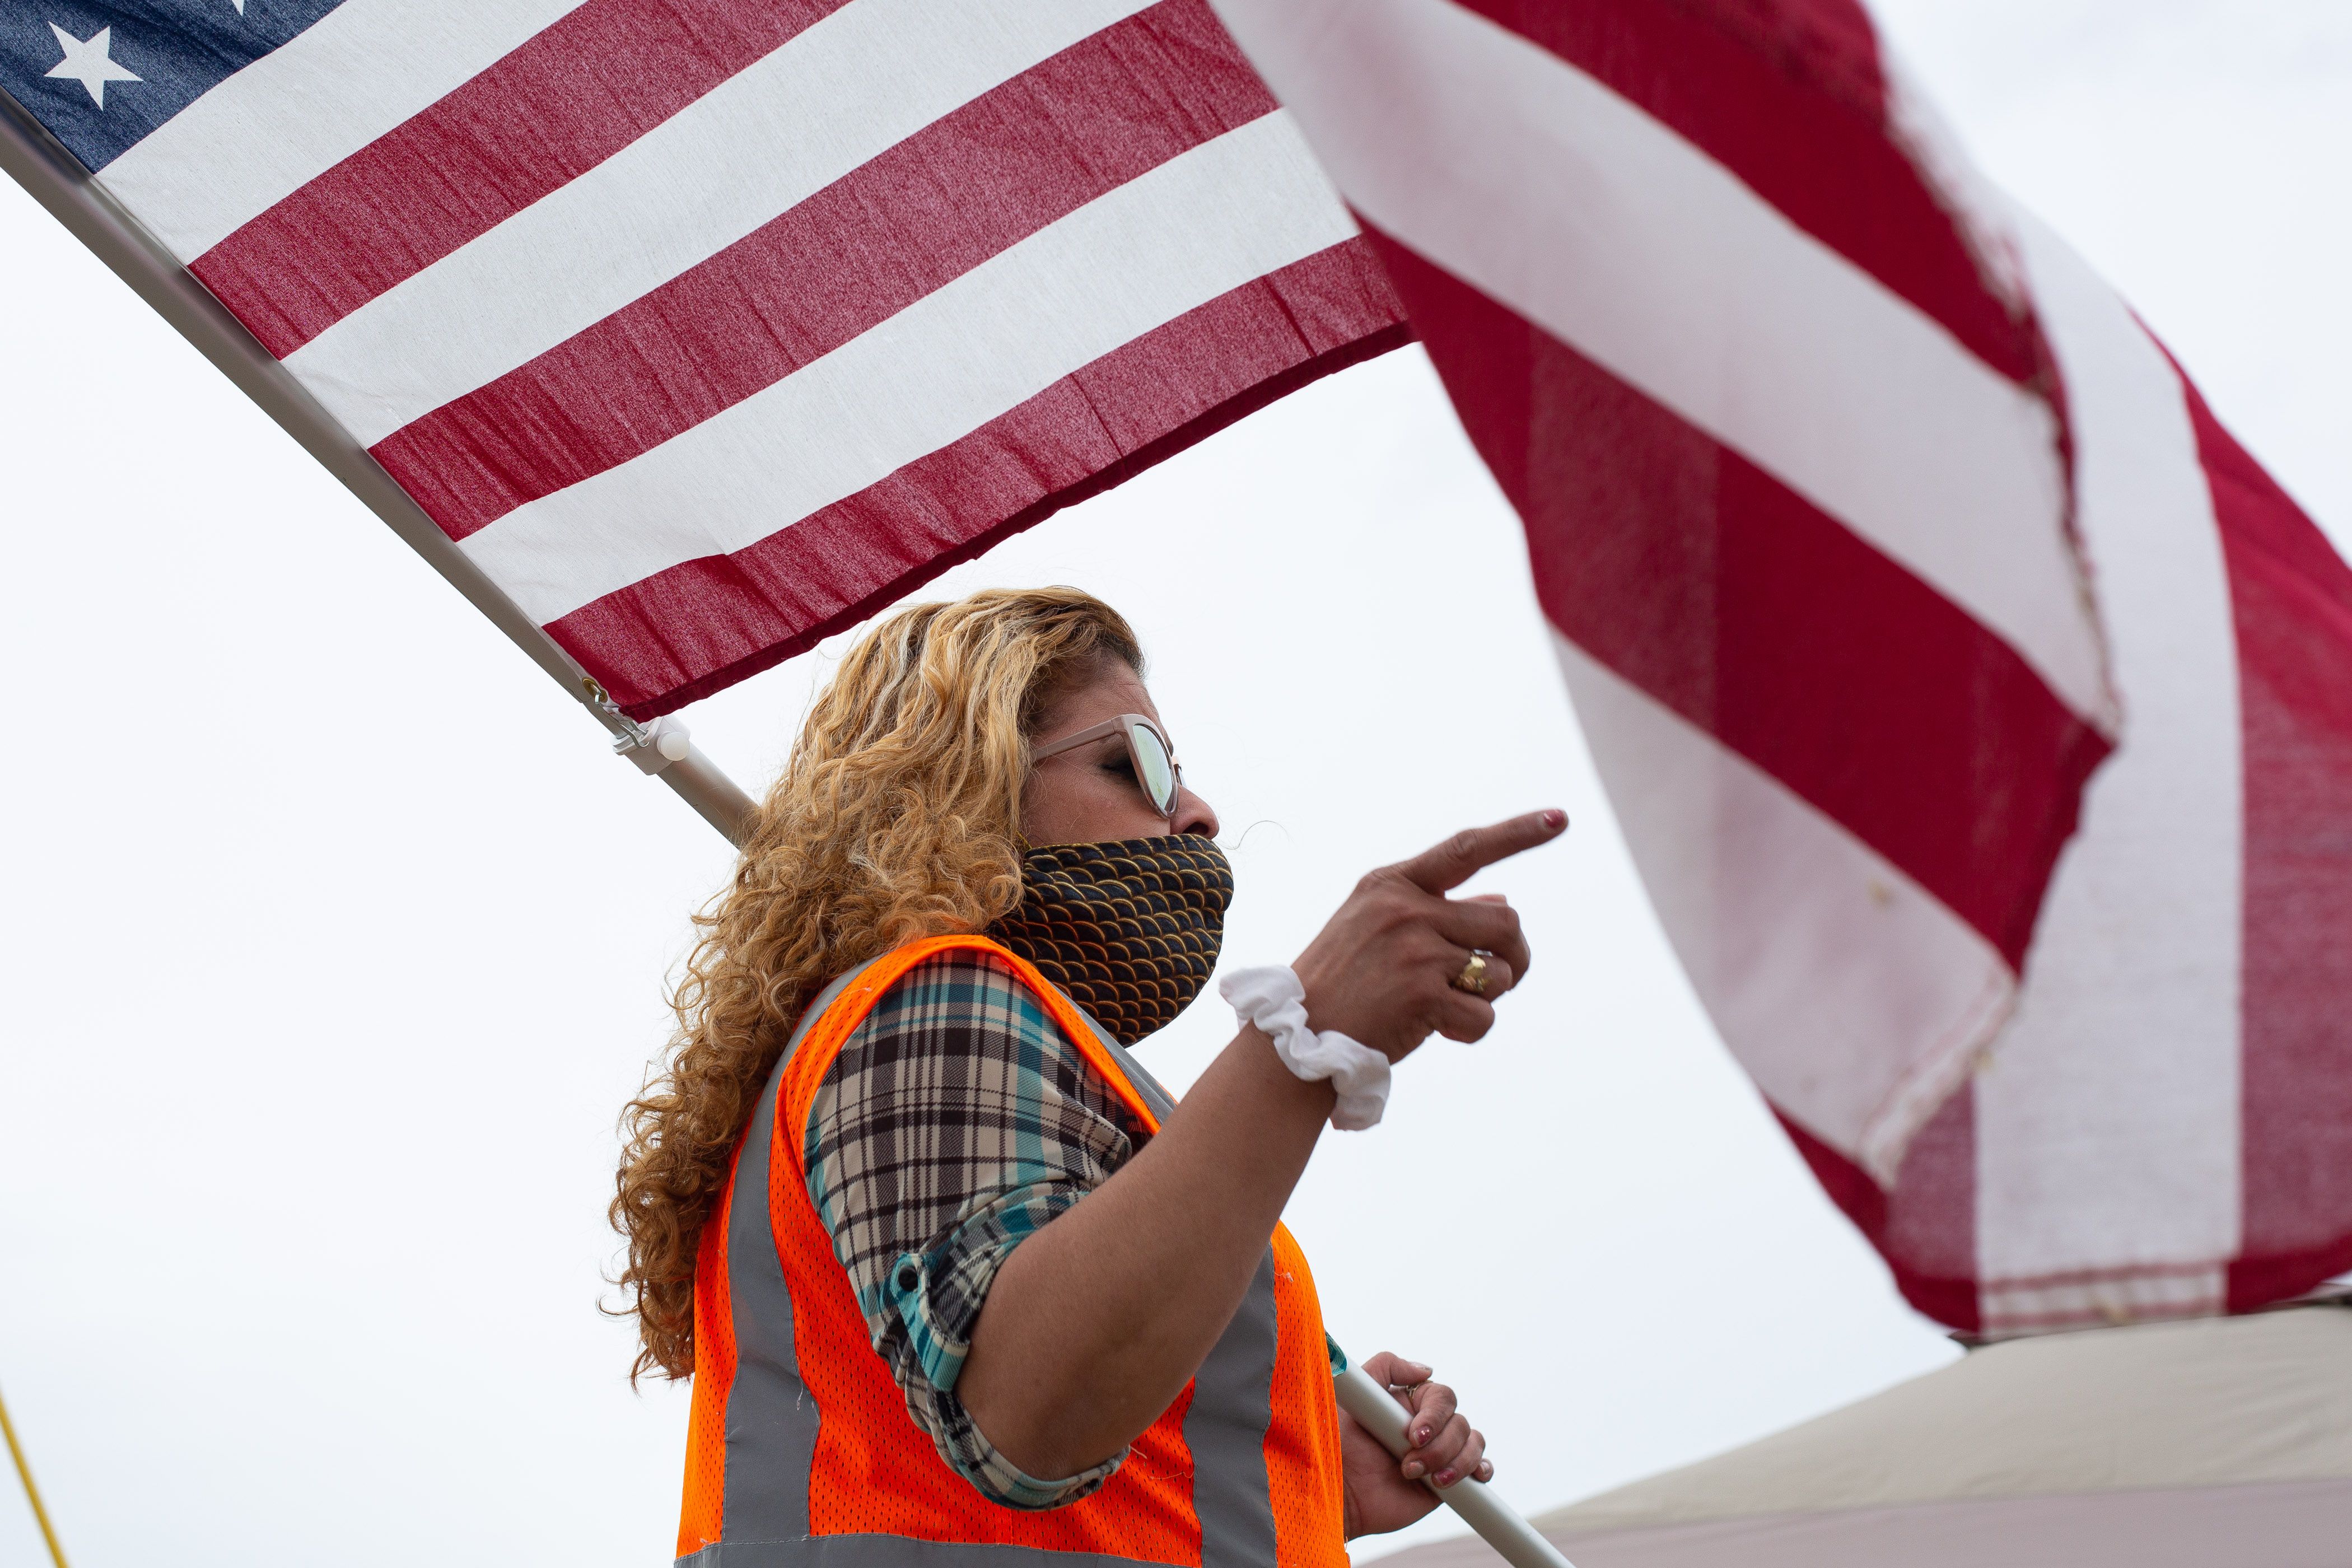 A person wearing a safety vest and face mask points a finger while holding an American flag.